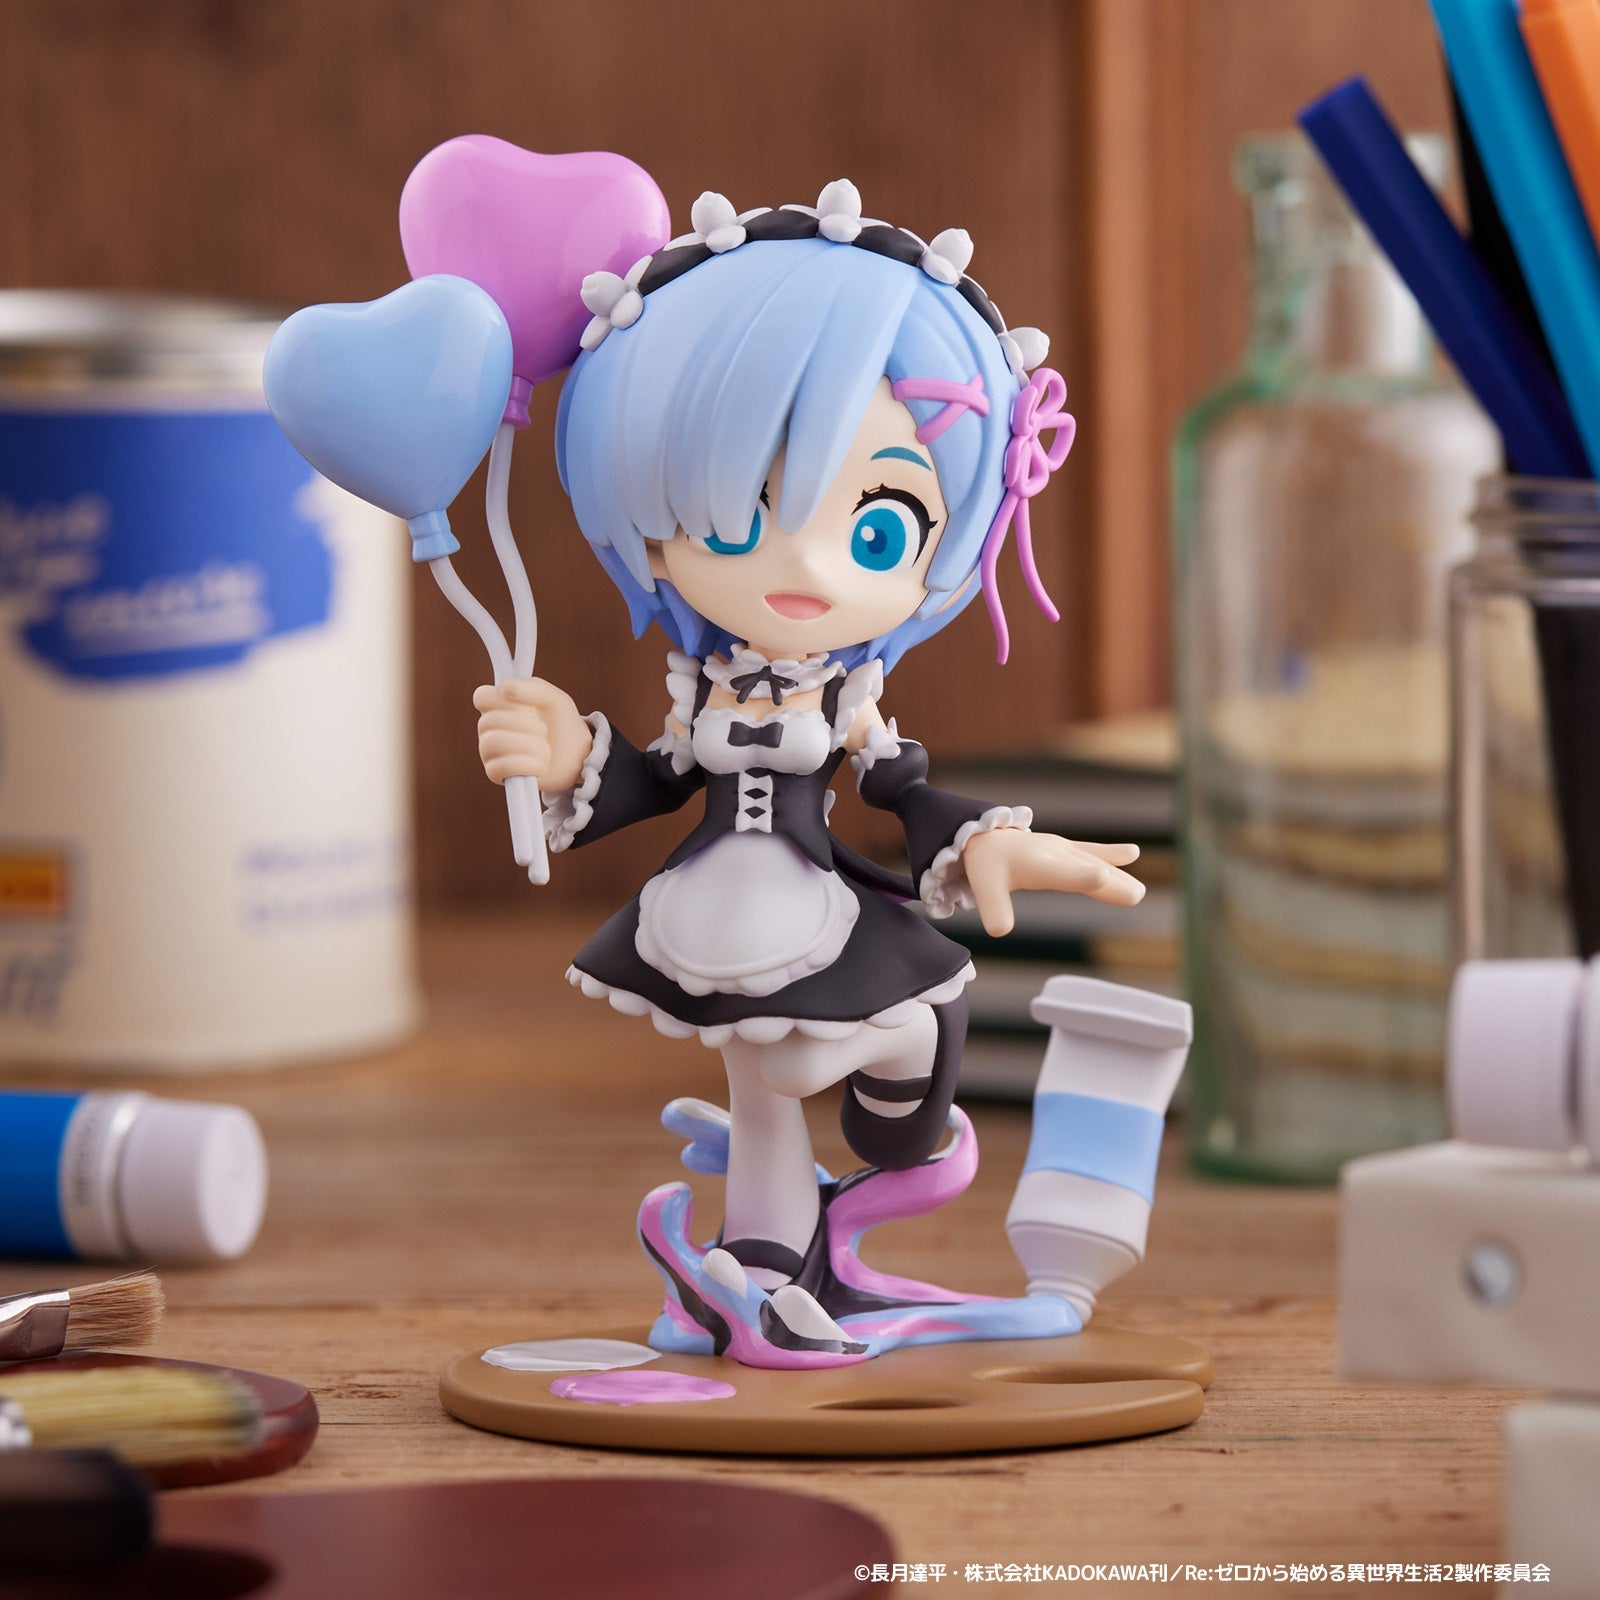 Re:Zero -Starting Life in Another World- PalVerse Palé. "Rem"-Bushiroad Creative-Ace Cards & Collectibles